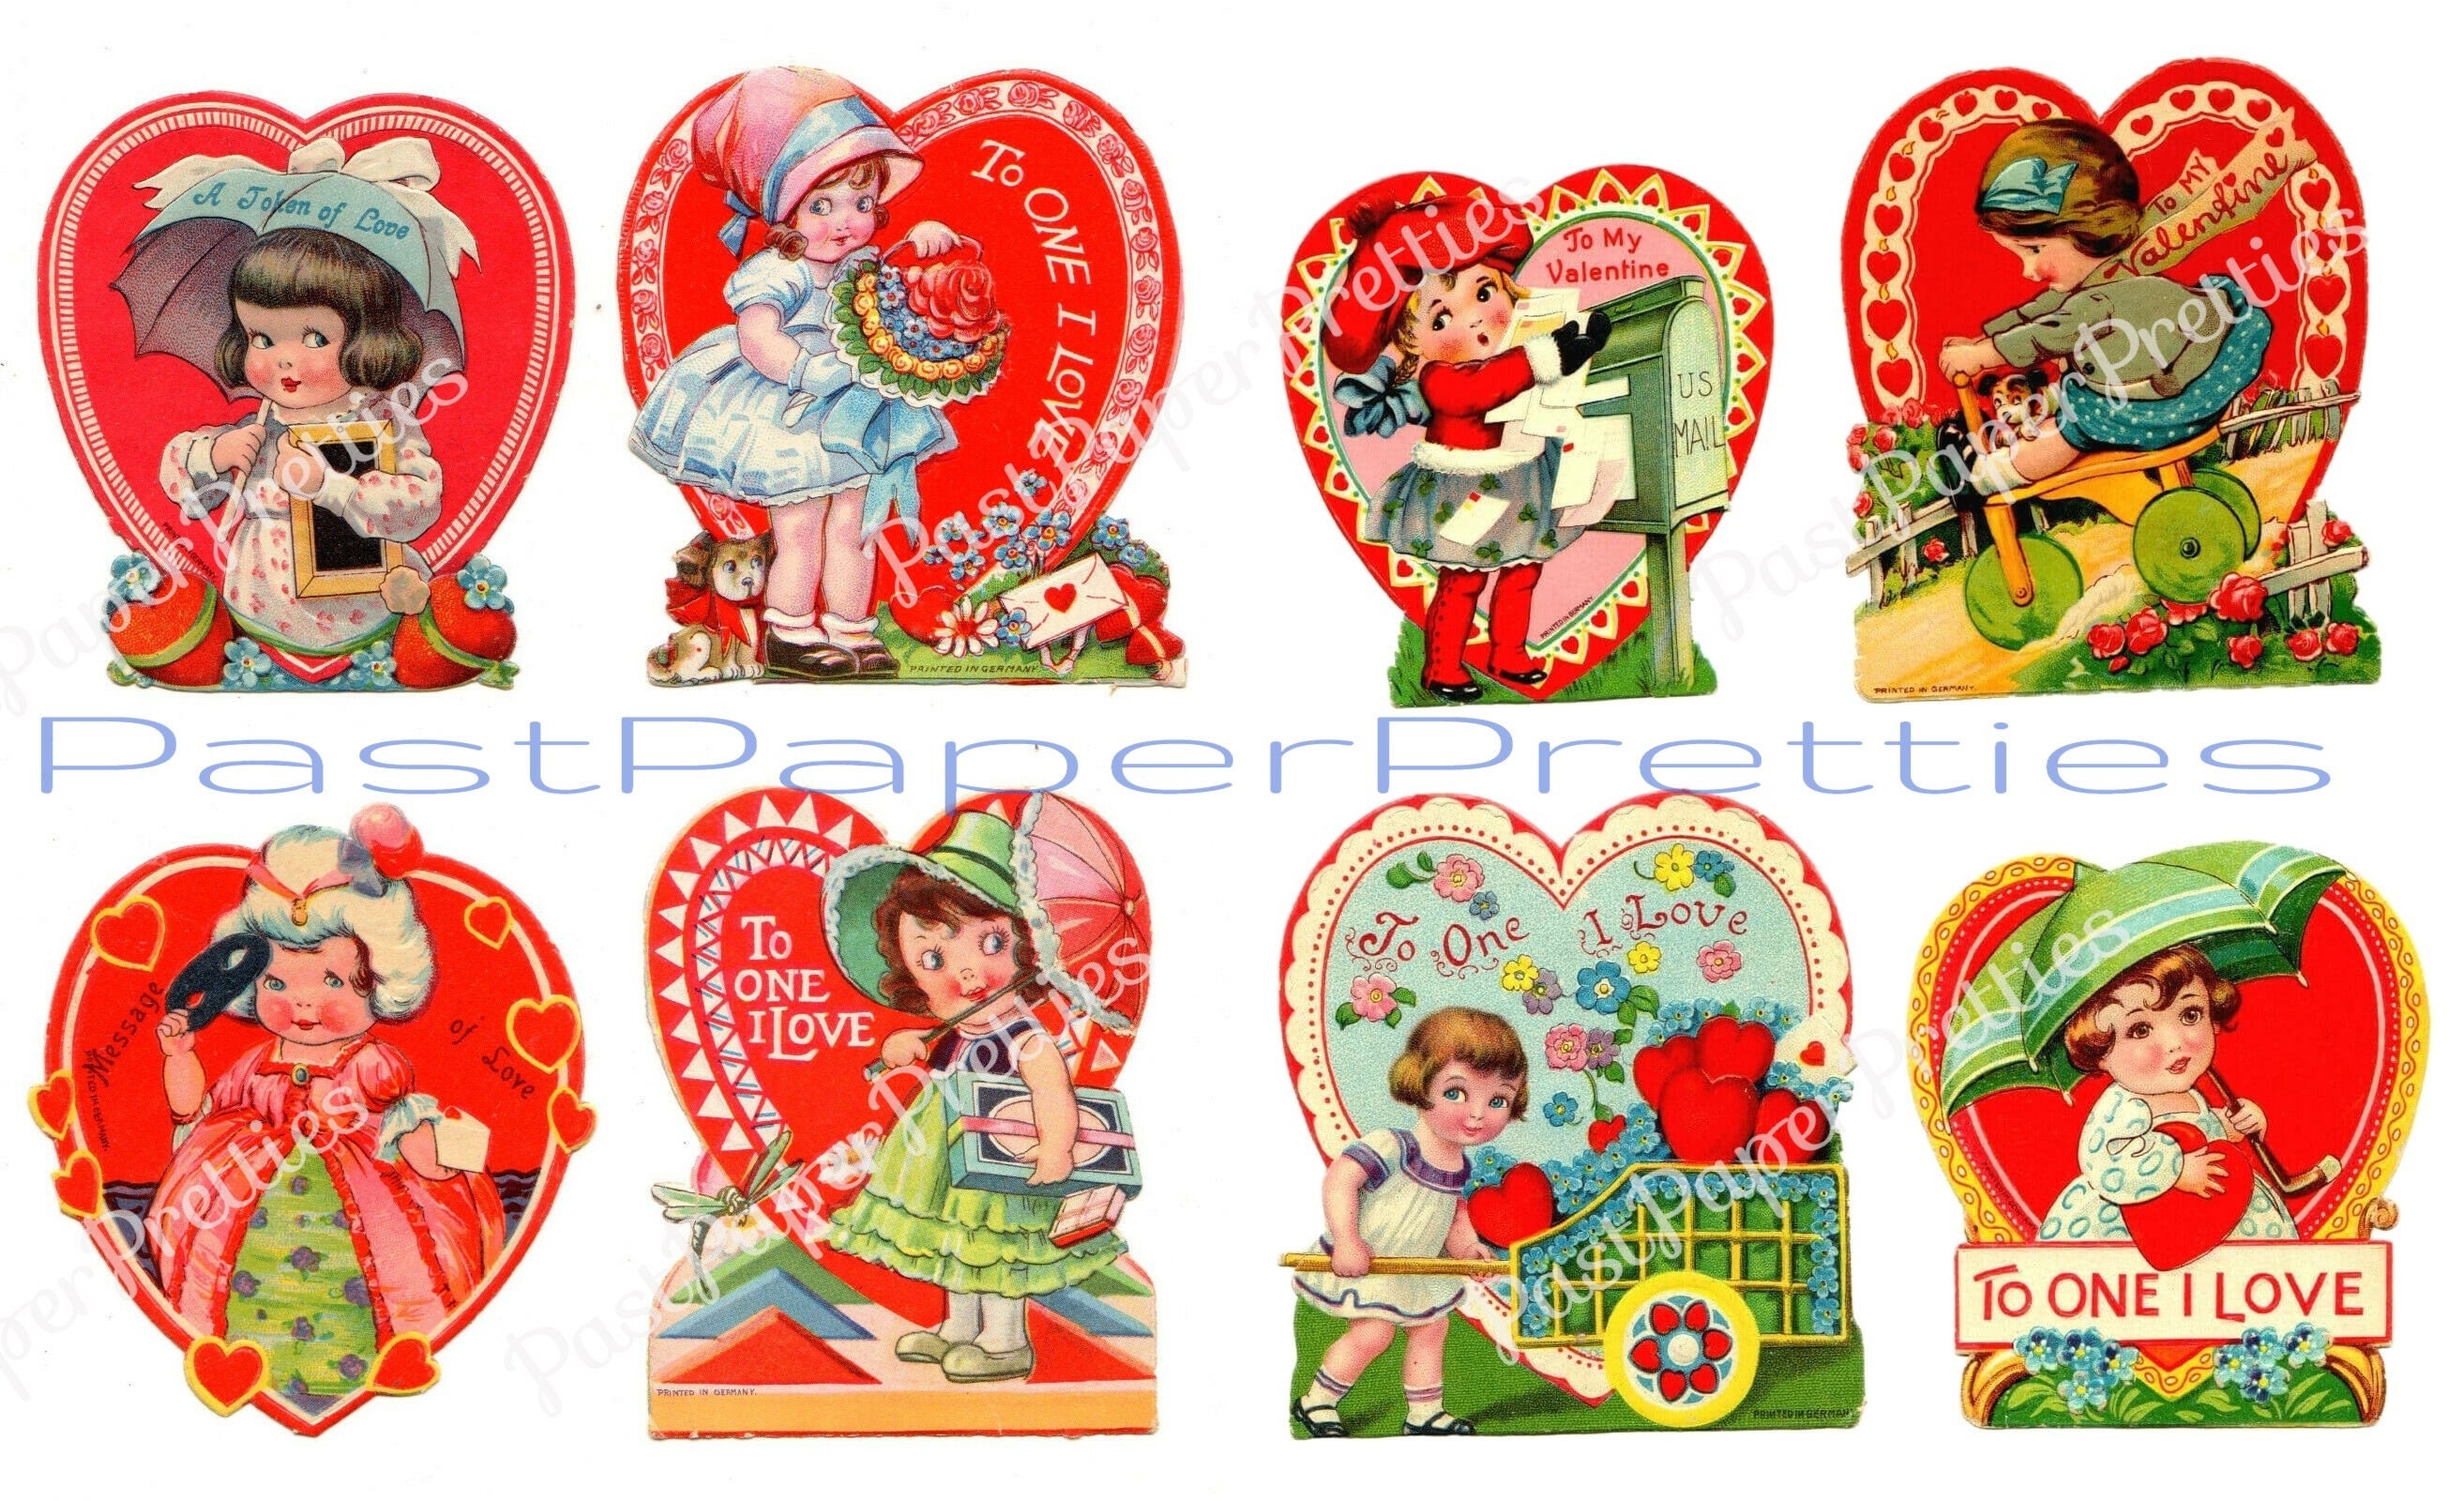 Vintage Valentines Day cards 1920s-1930s